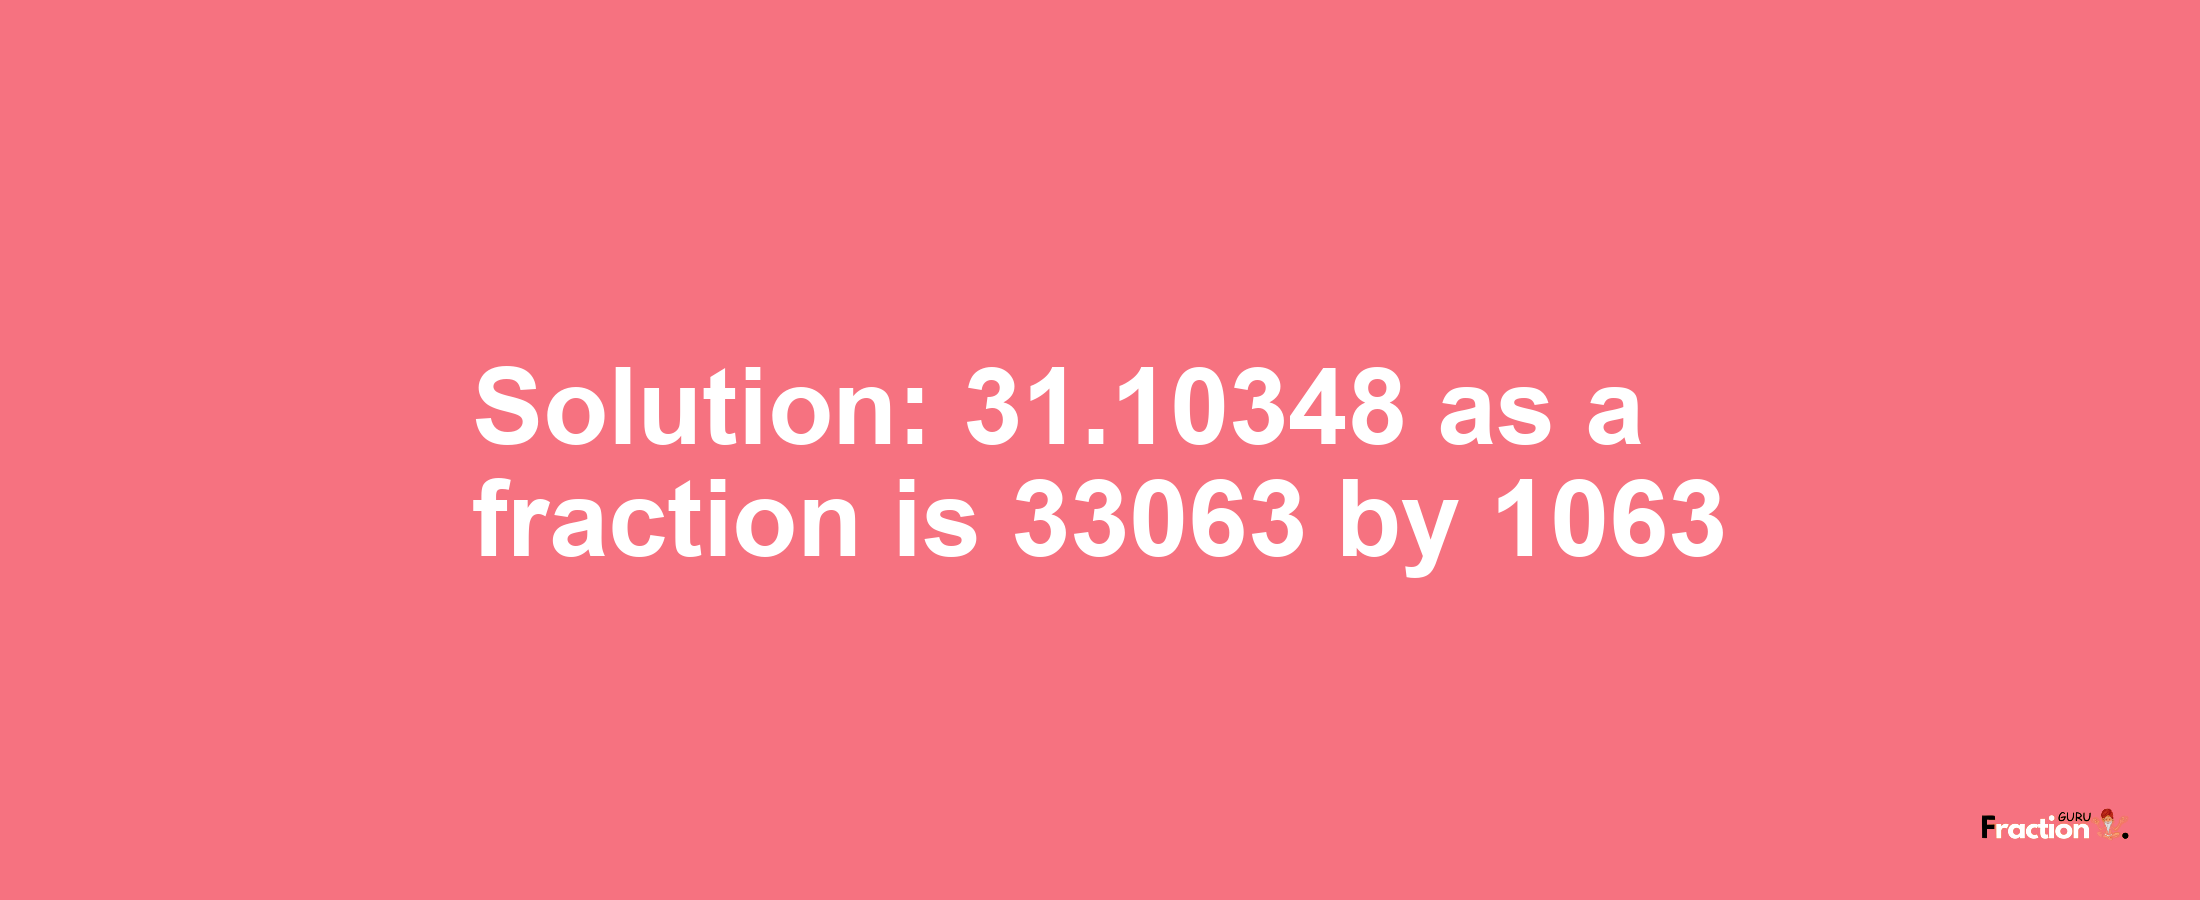 Solution:31.10348 as a fraction is 33063/1063